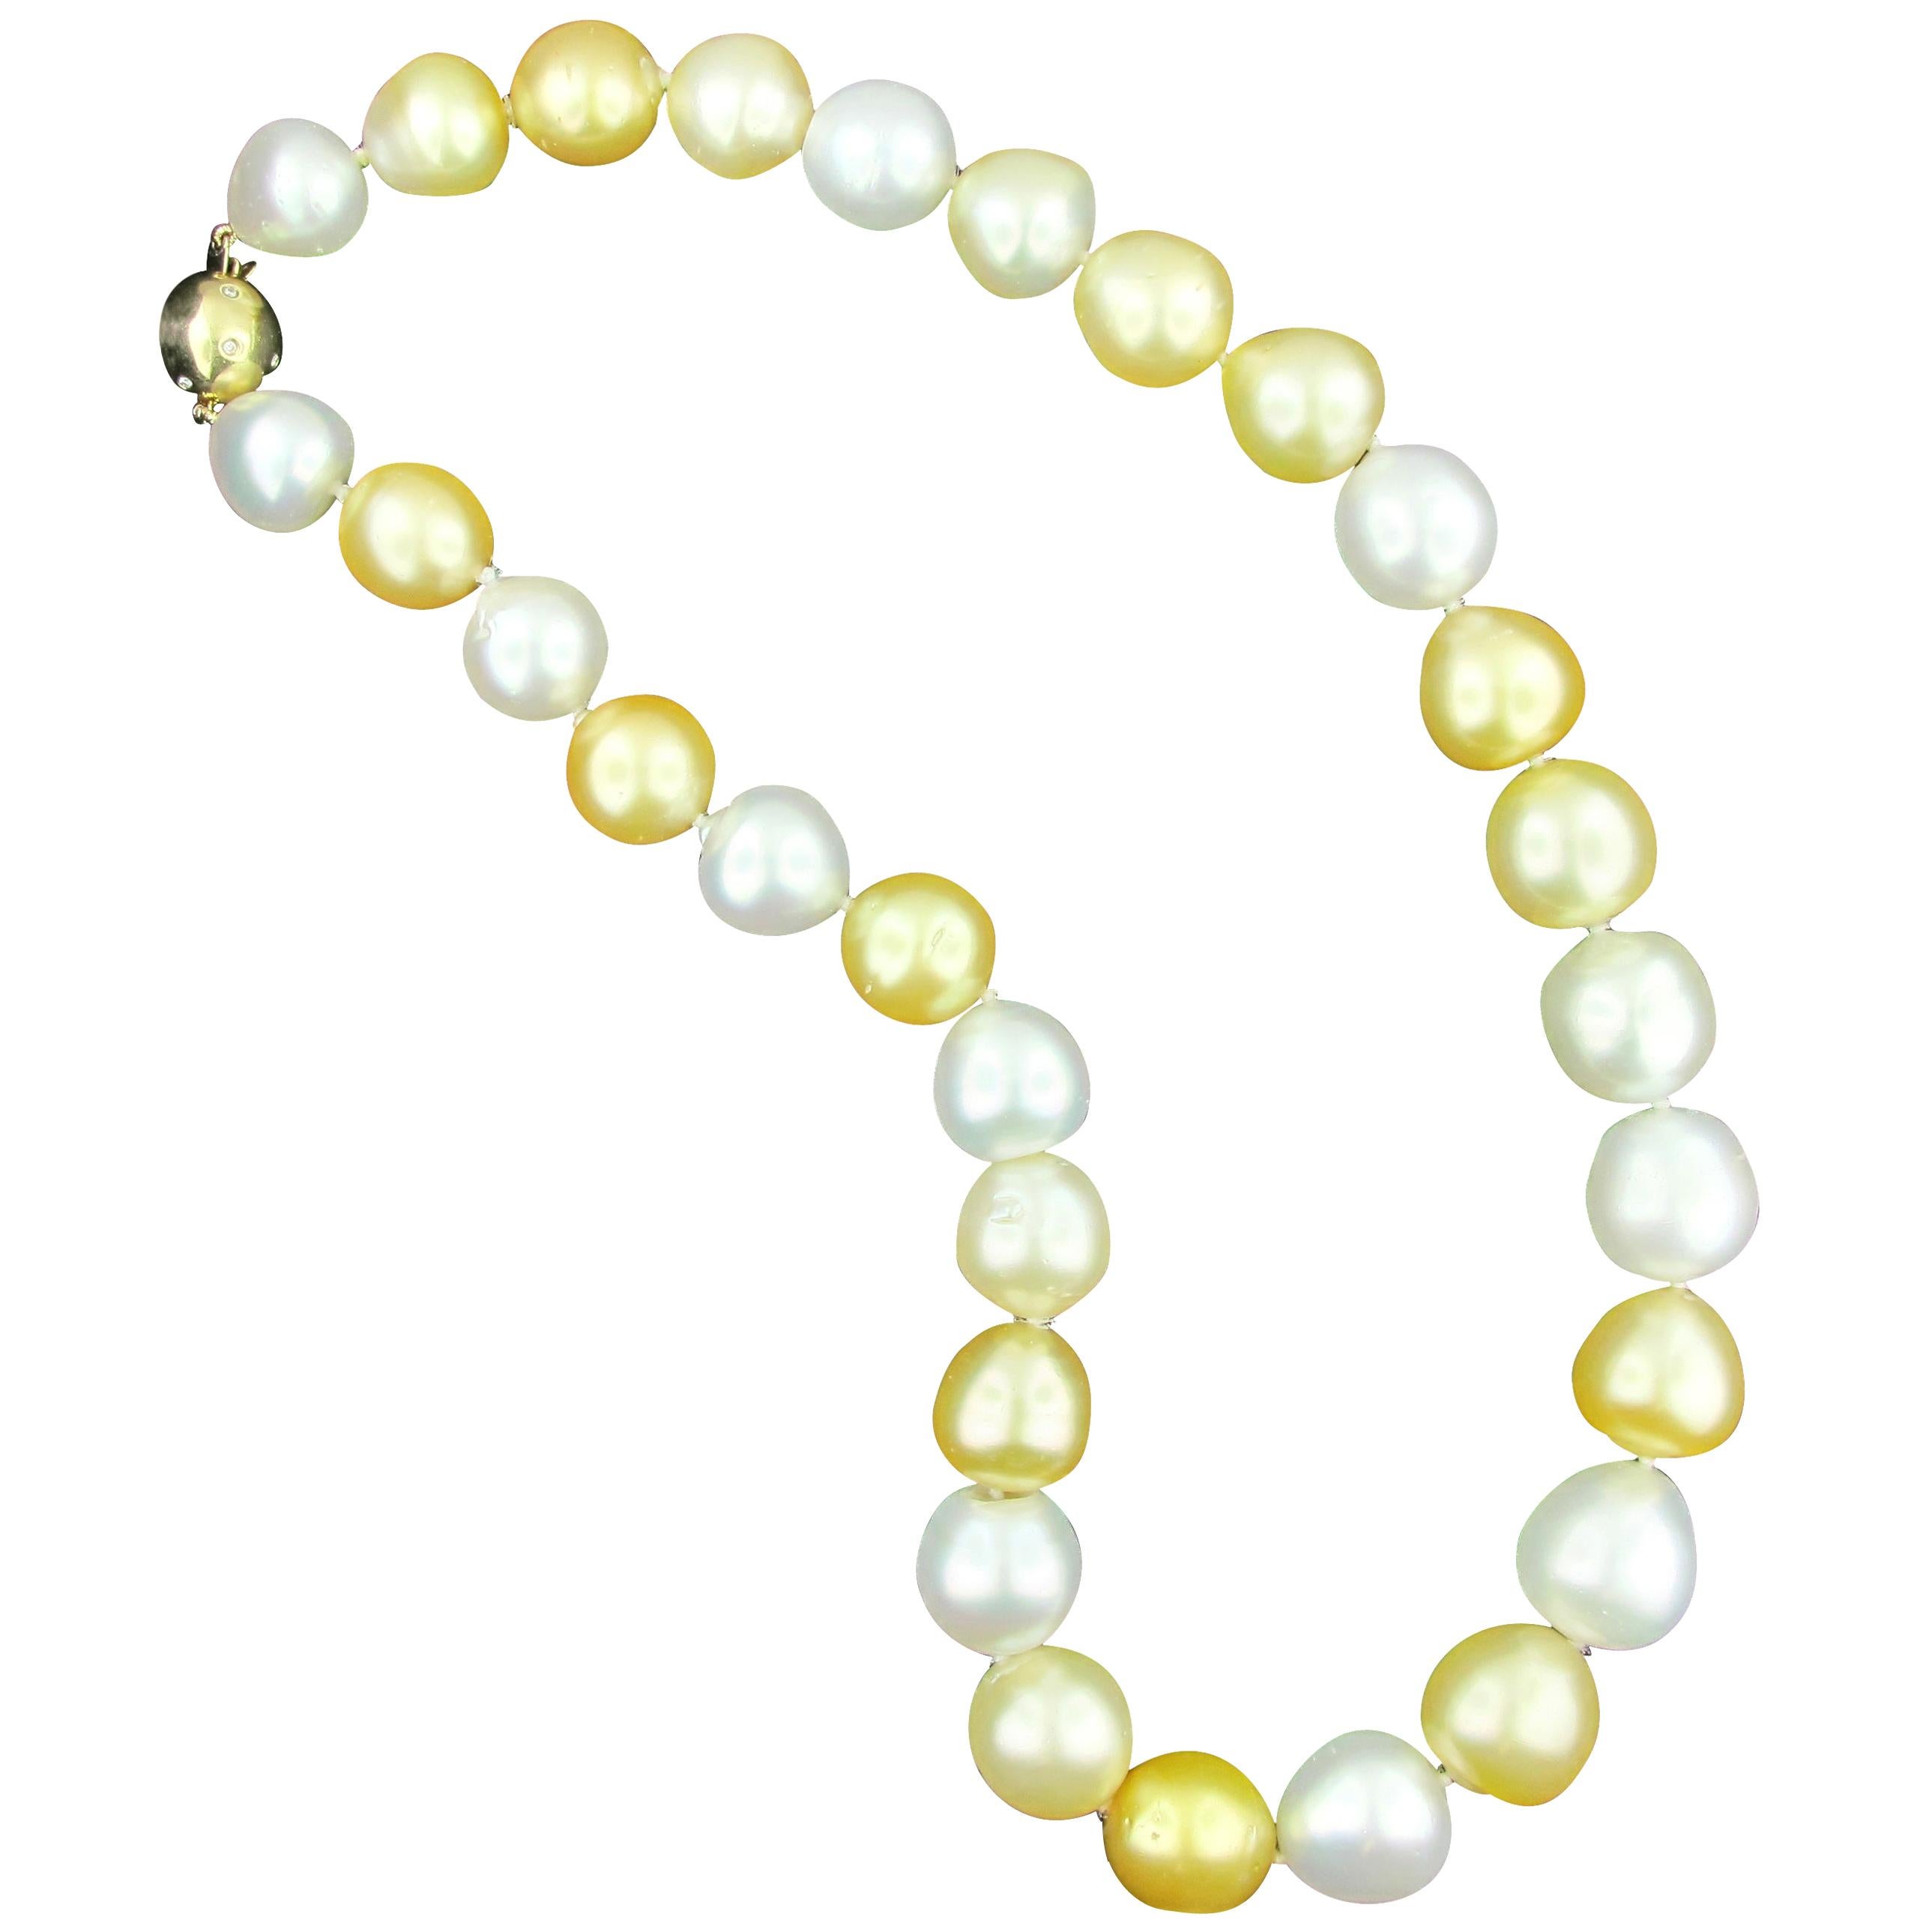 White and Golden South Sea Pearl Necklace with 14 KT Yellow Gold & Diamond Clasp For Sale